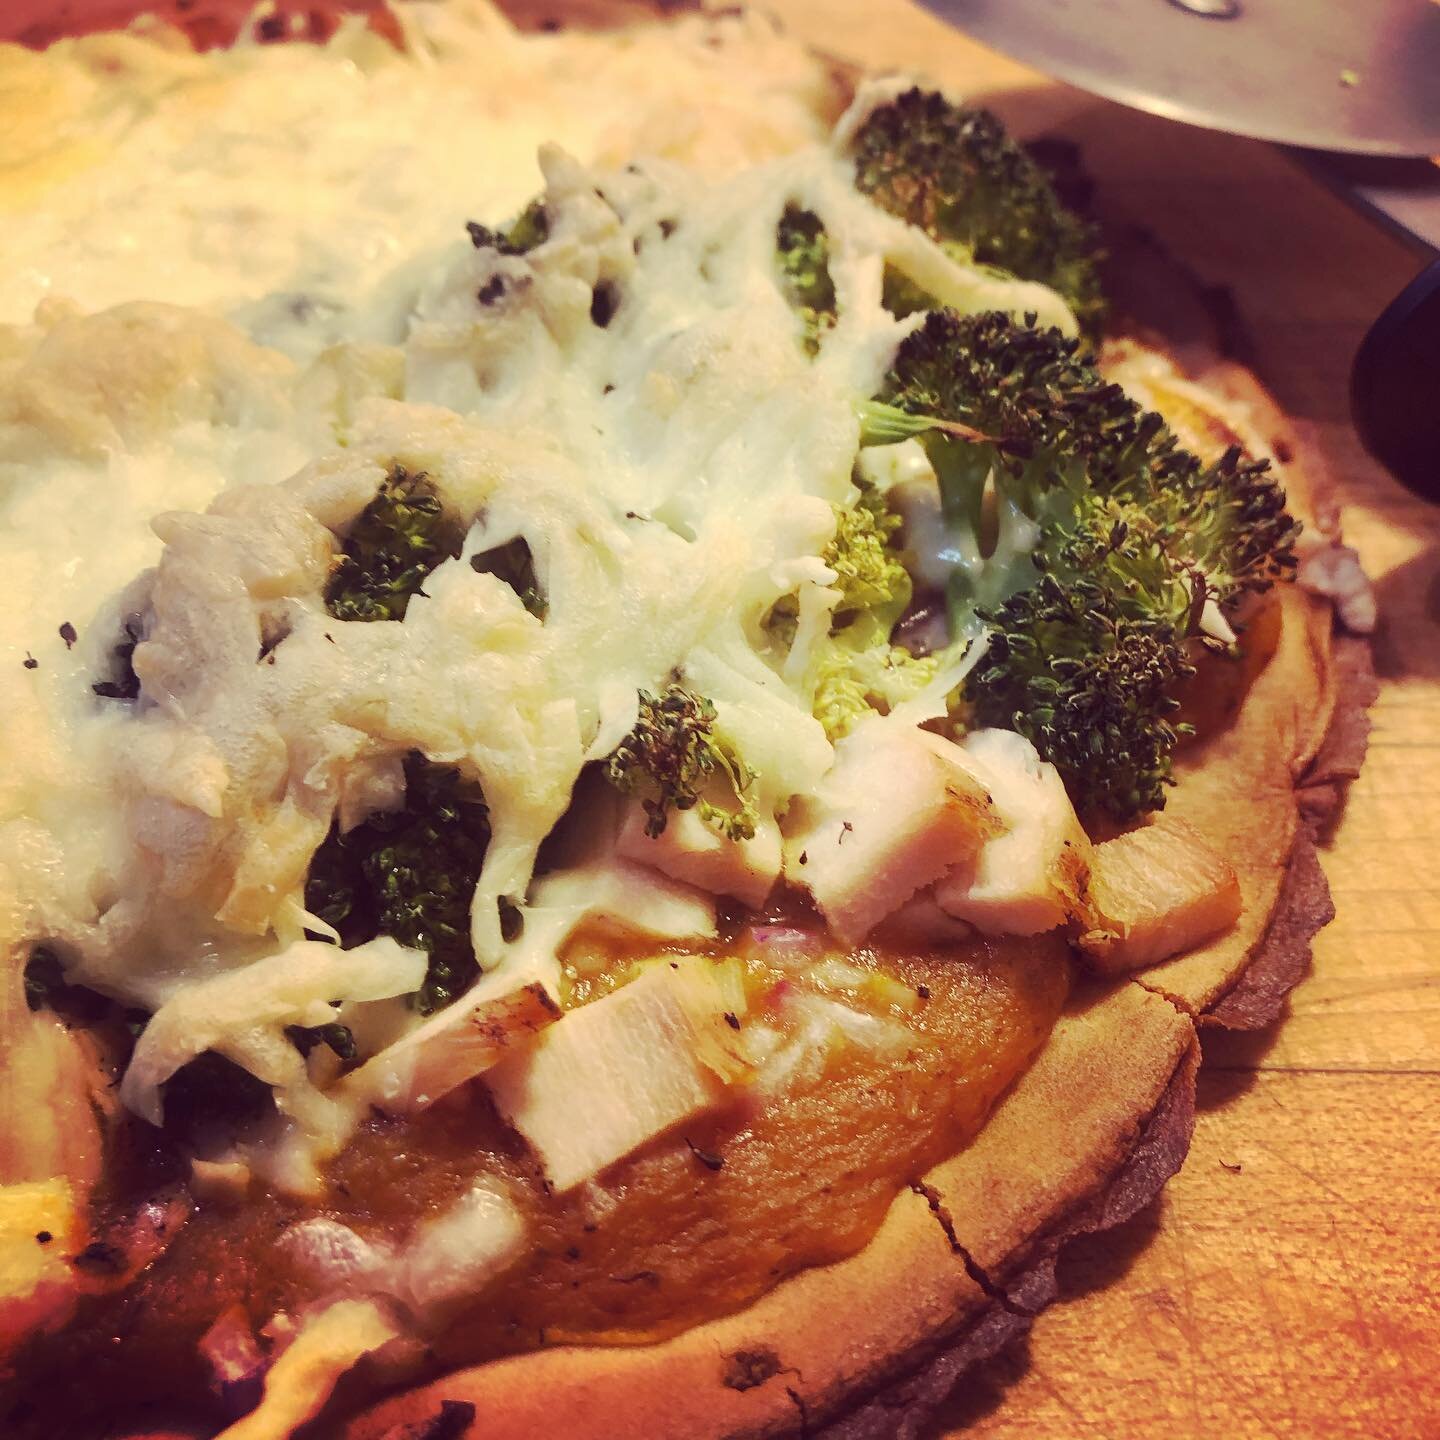 Craving a delicious homemade pizza and came up with bbq chicken and broccoli made with @loblawson @preschoice free-from #chicken on @napoleonproducts #bbq @caulipower crust #nightshadefree #glutenfree @ladeedagourmetsauces #beet #non-gmo #brocolli @s